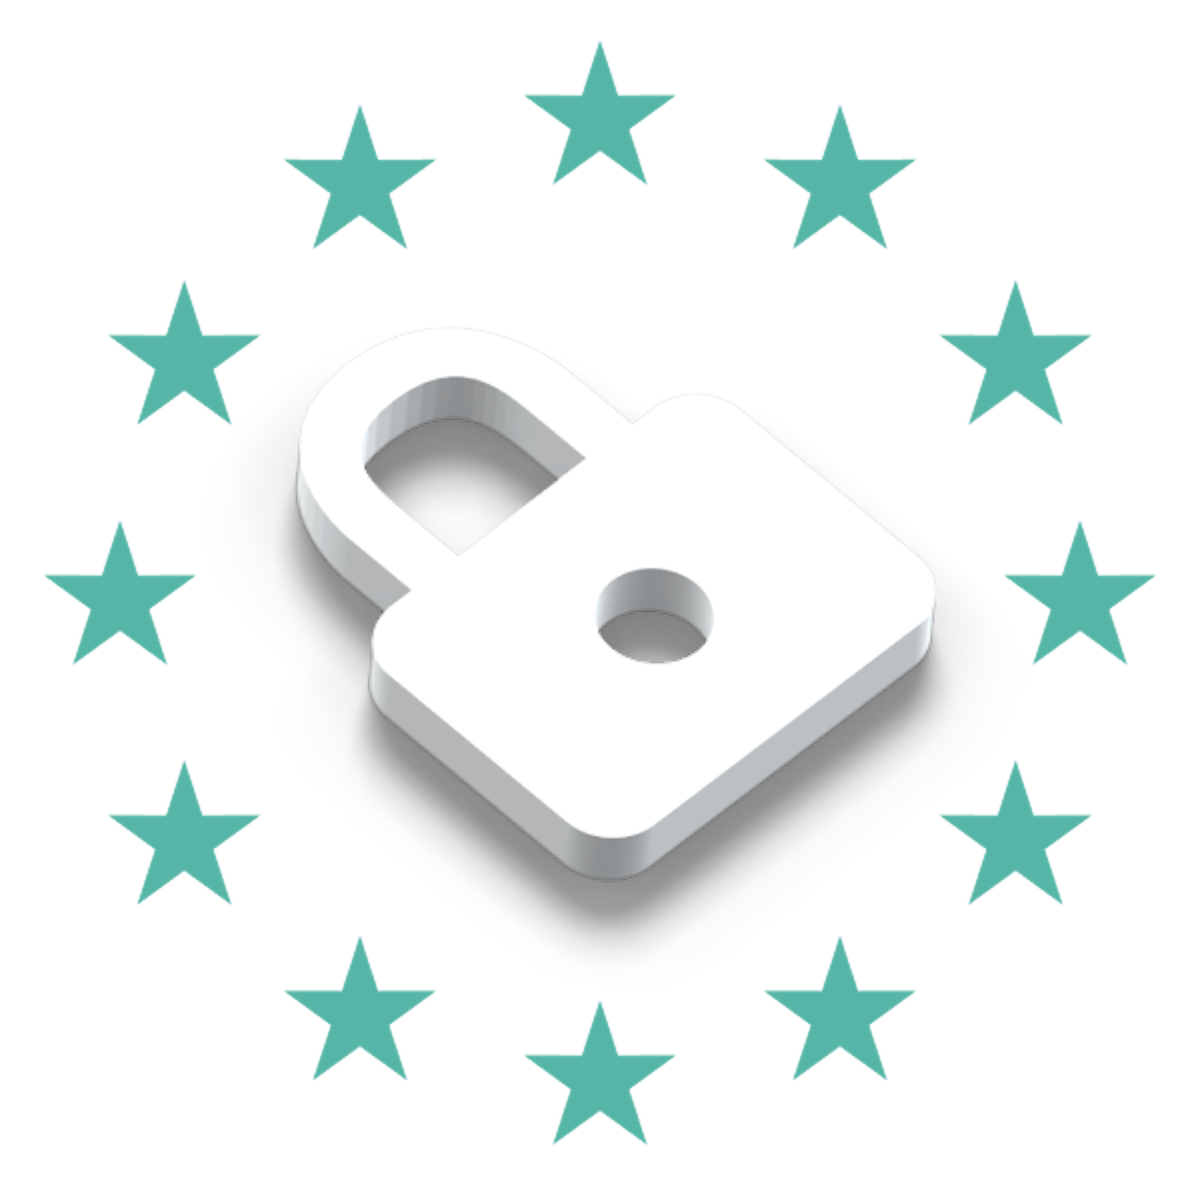 Illustration of a lock surrounded by stars